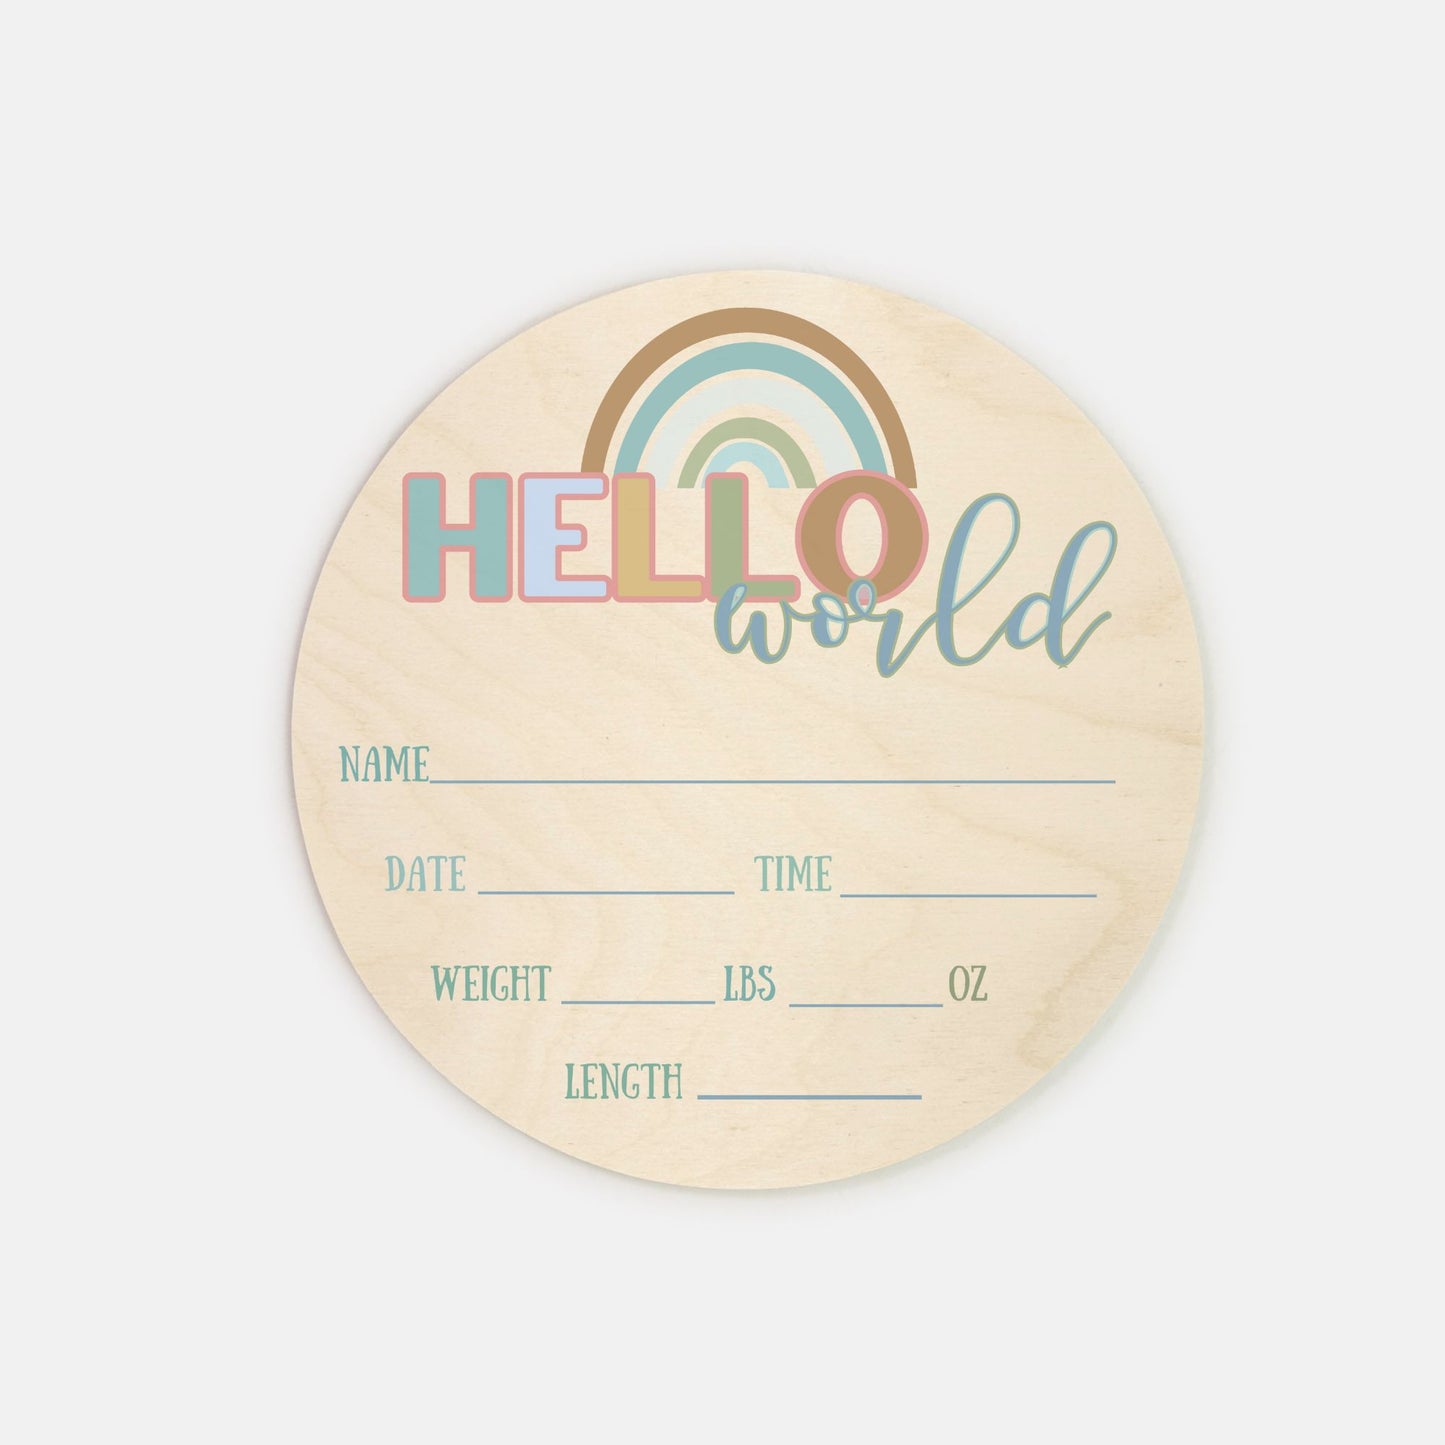 Birth Stats 8" Round Wood Sign - Gender Neutral Name Sign - Personalized Newborn Announcement - Hello World Nursery Sign